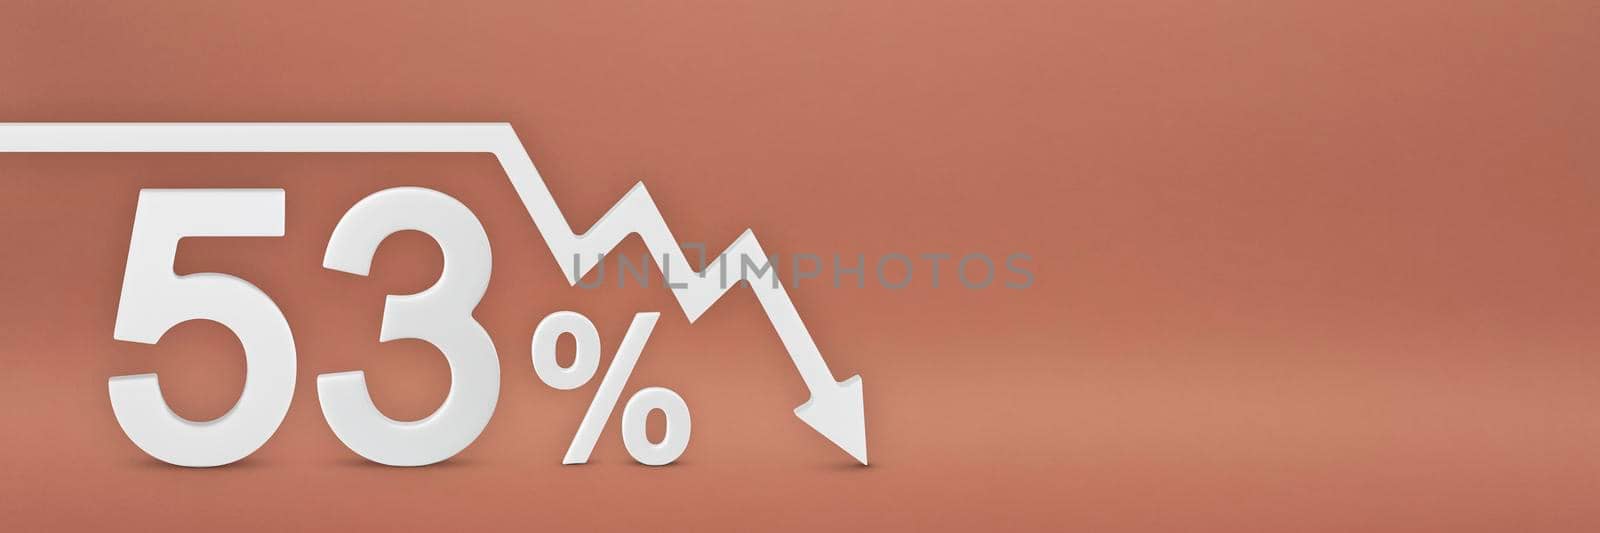 fifty-three percent, the arrow on the graph is pointing down. Stock market crash, bear market, inflation.Economic collapse, collapse of stocks.3d banner,53 percent discount sign on a red background